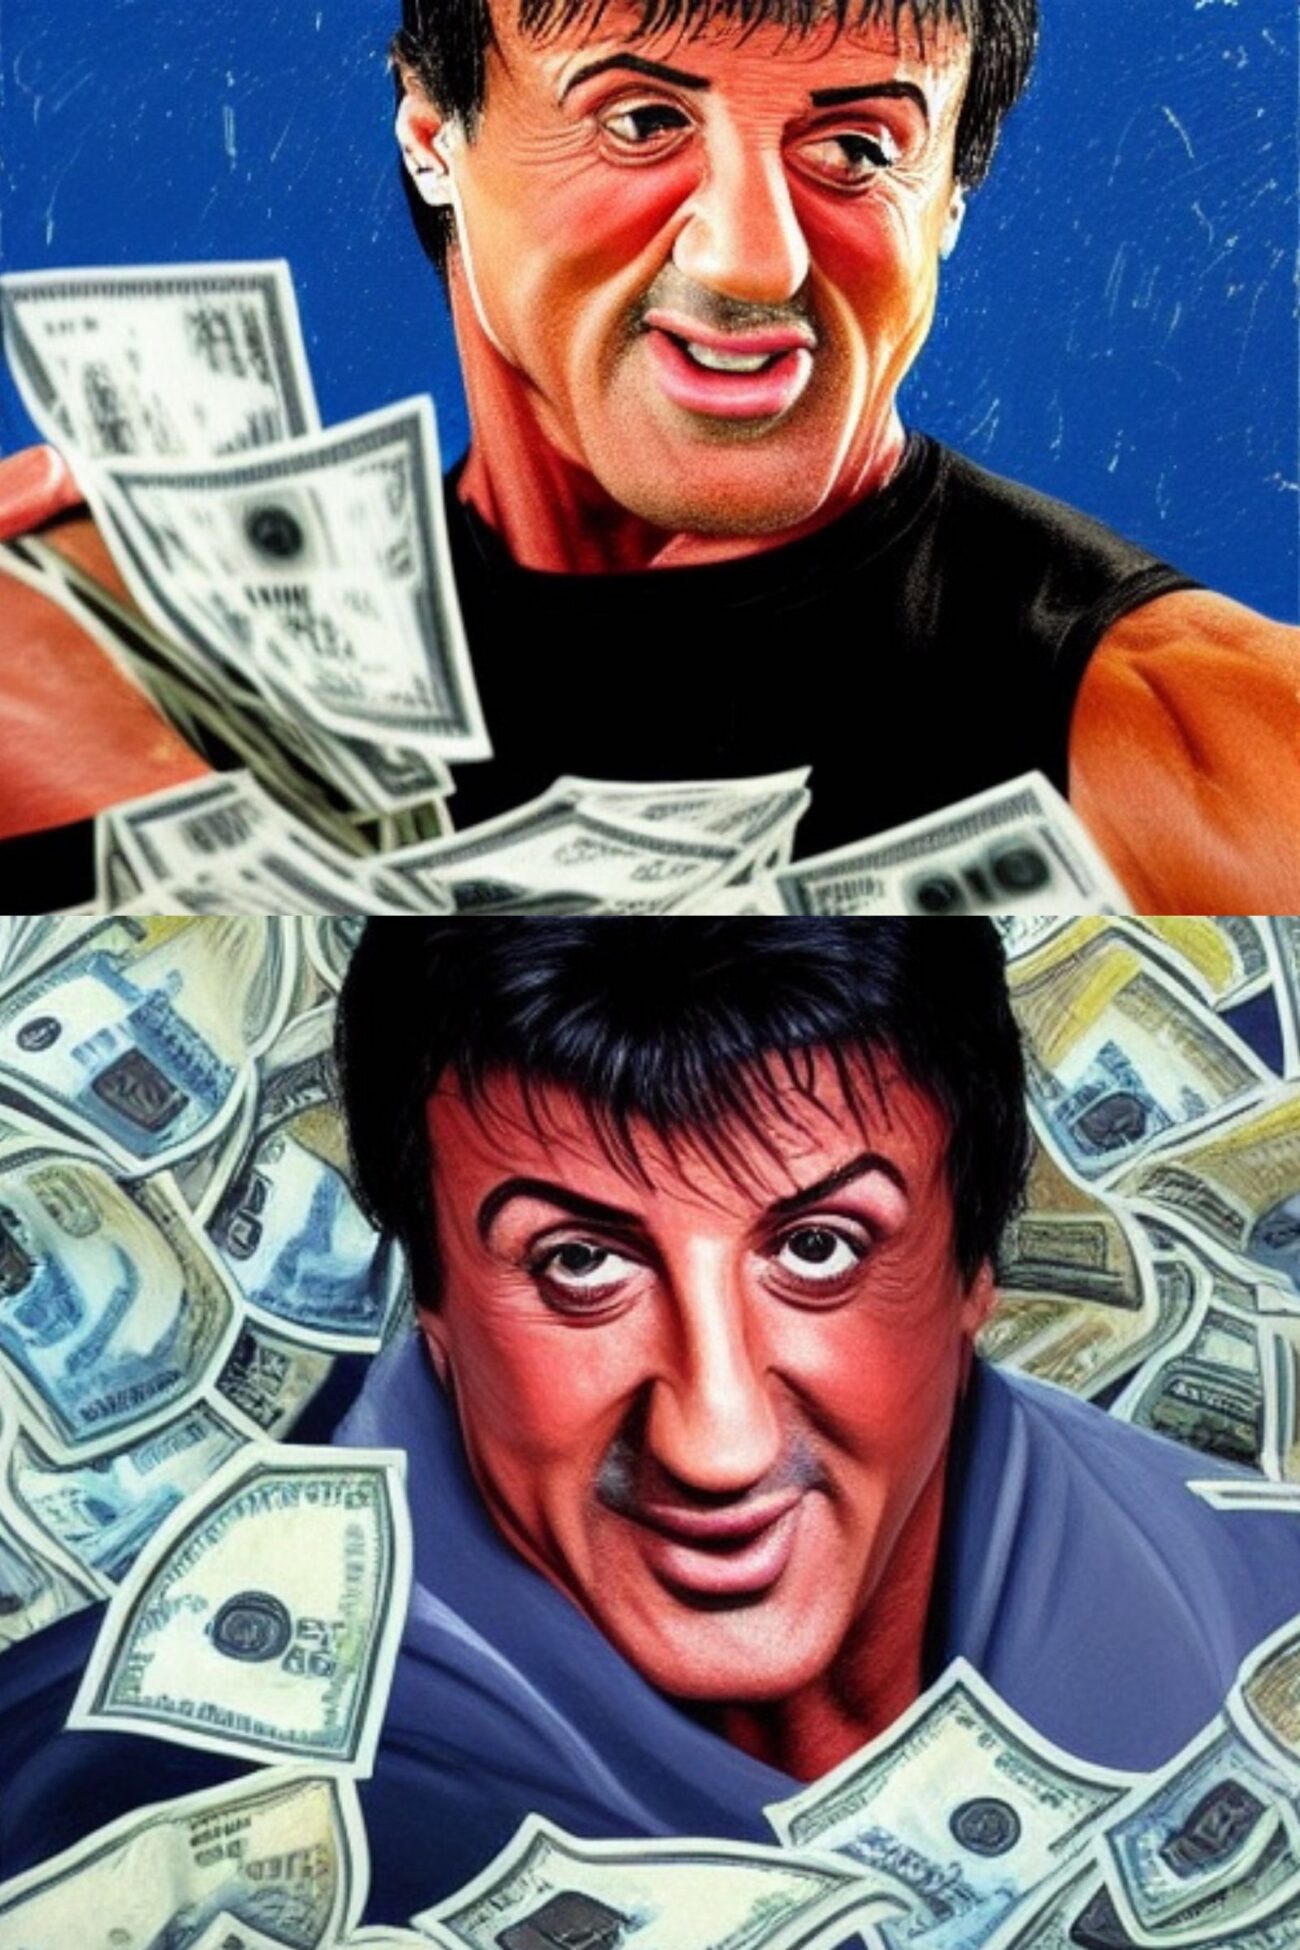 What is the real age of Sylvester Stallone? And do his recent posts signal a retirement? Let's find out!